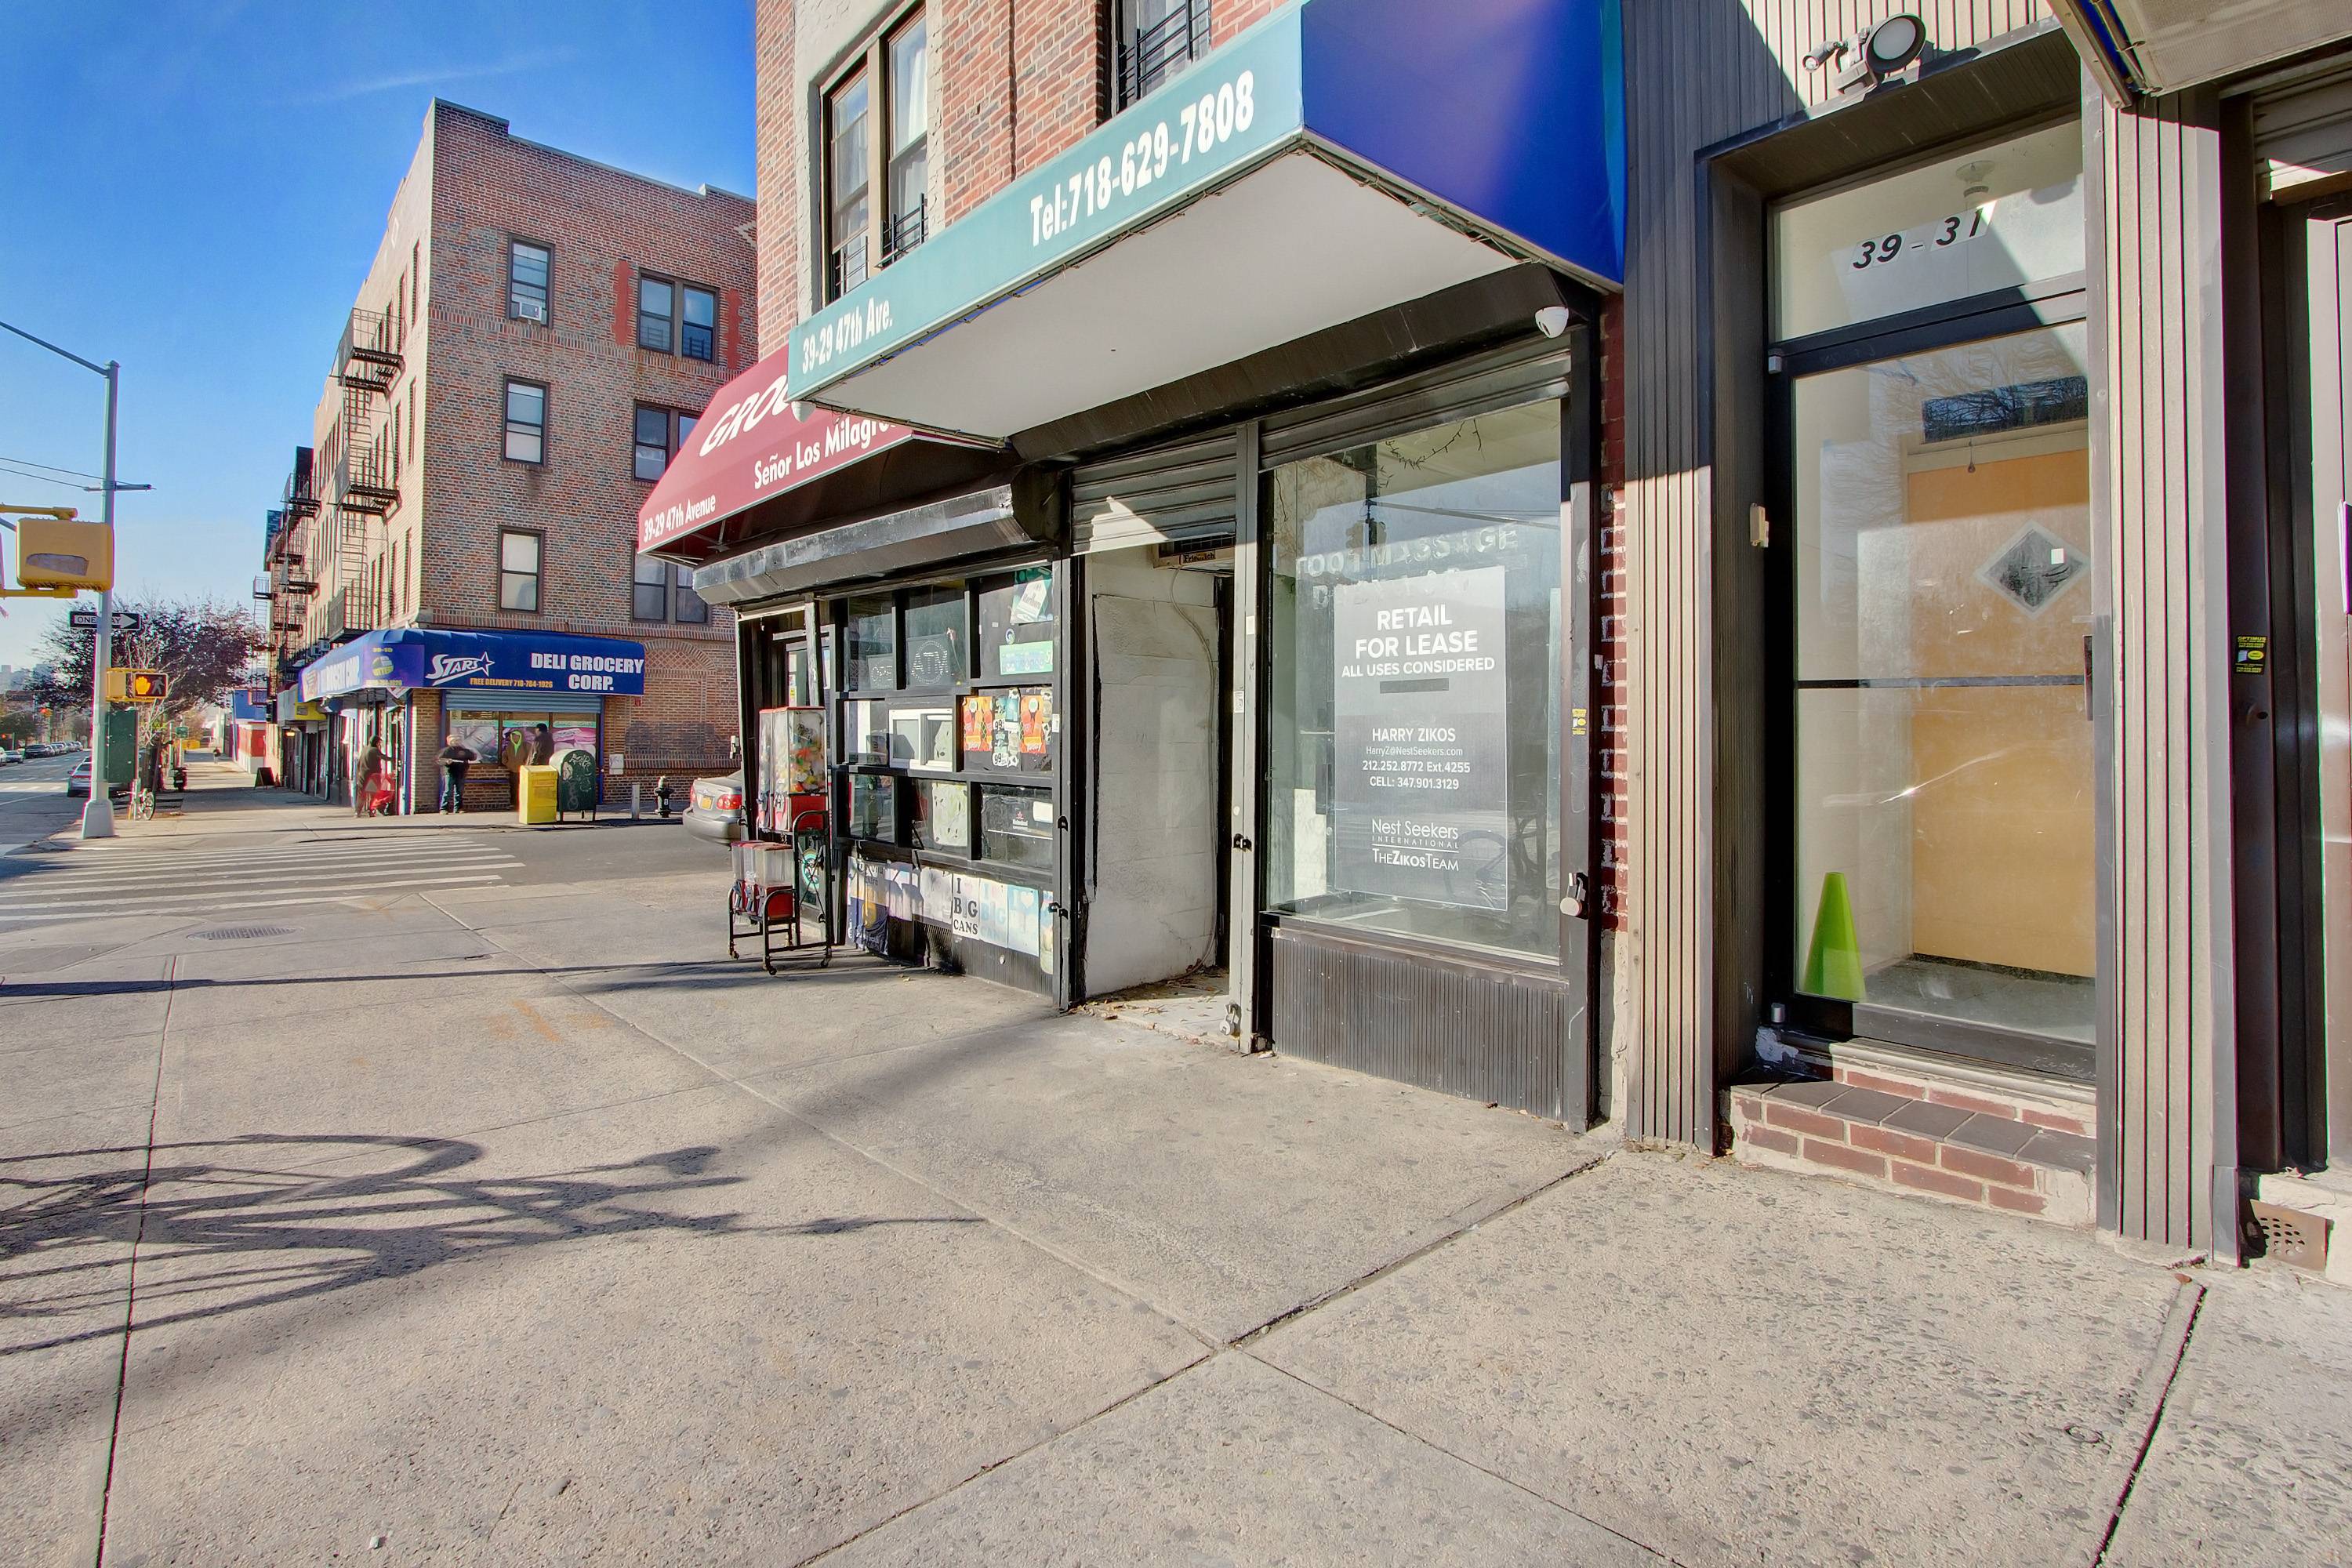 Sunnyside, Queens: In-Line Retail Space For Rent a Block away from 7 Train